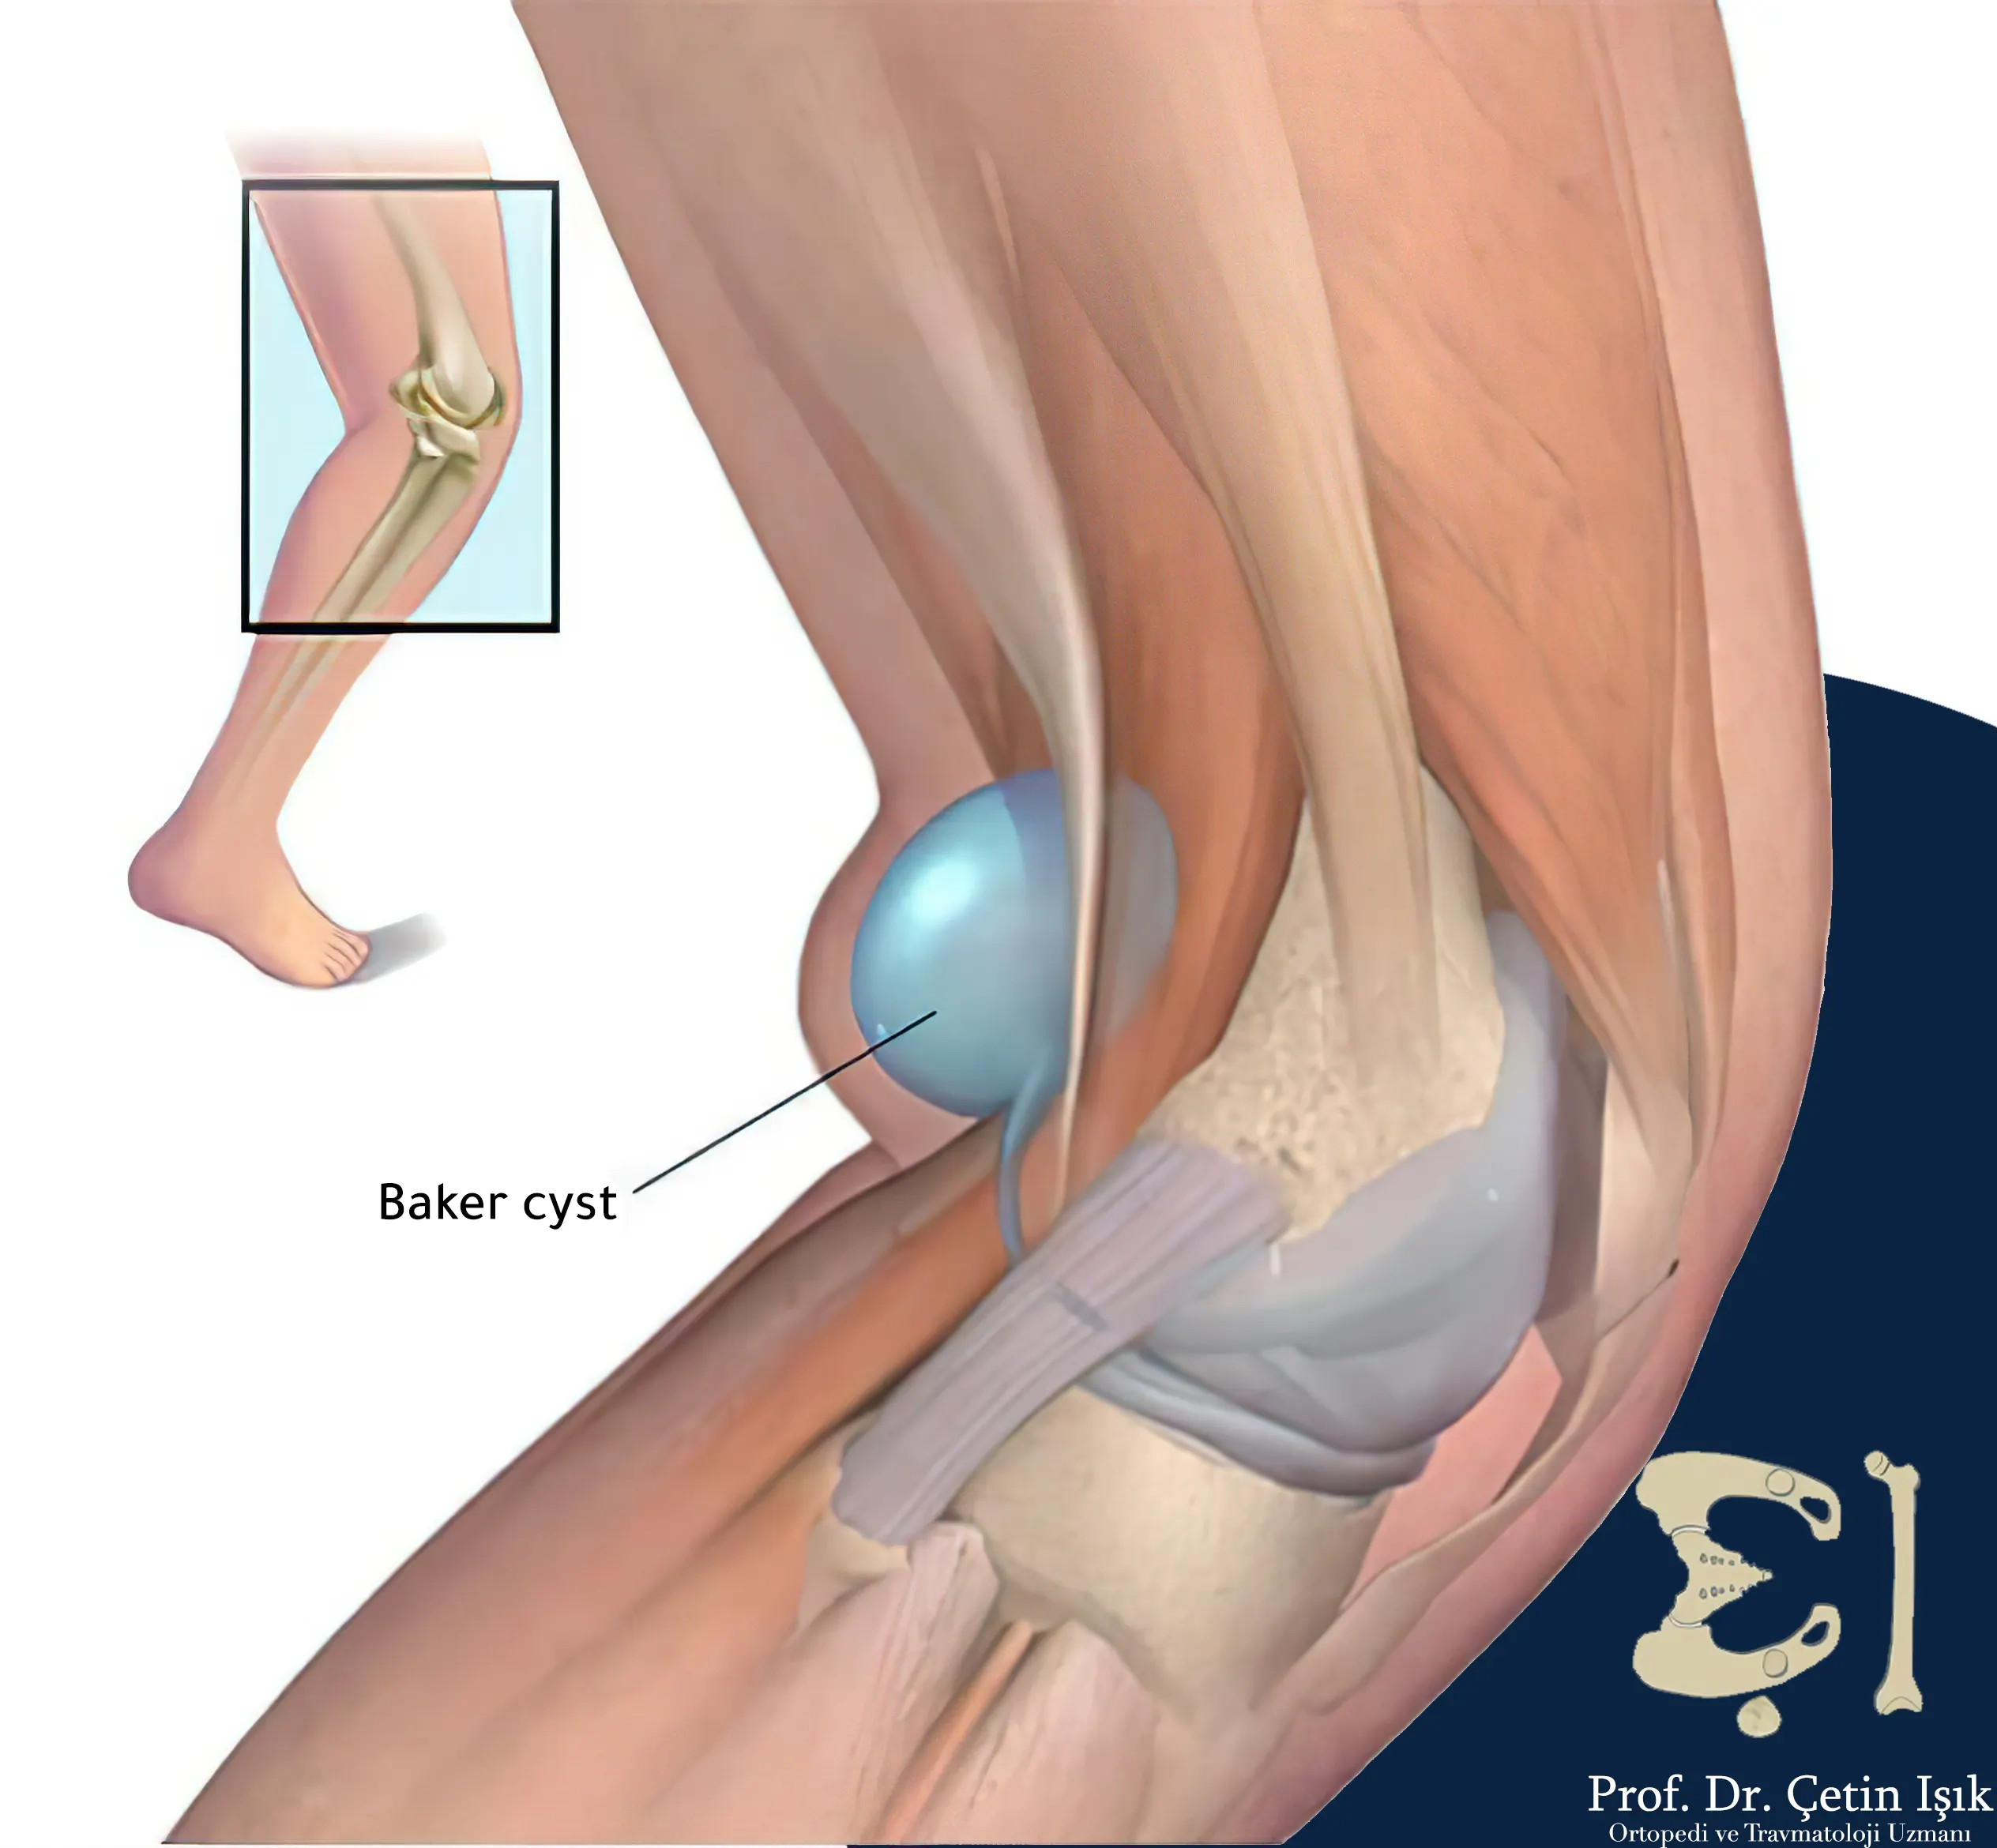 Baker's cyst is located at the back of the knee